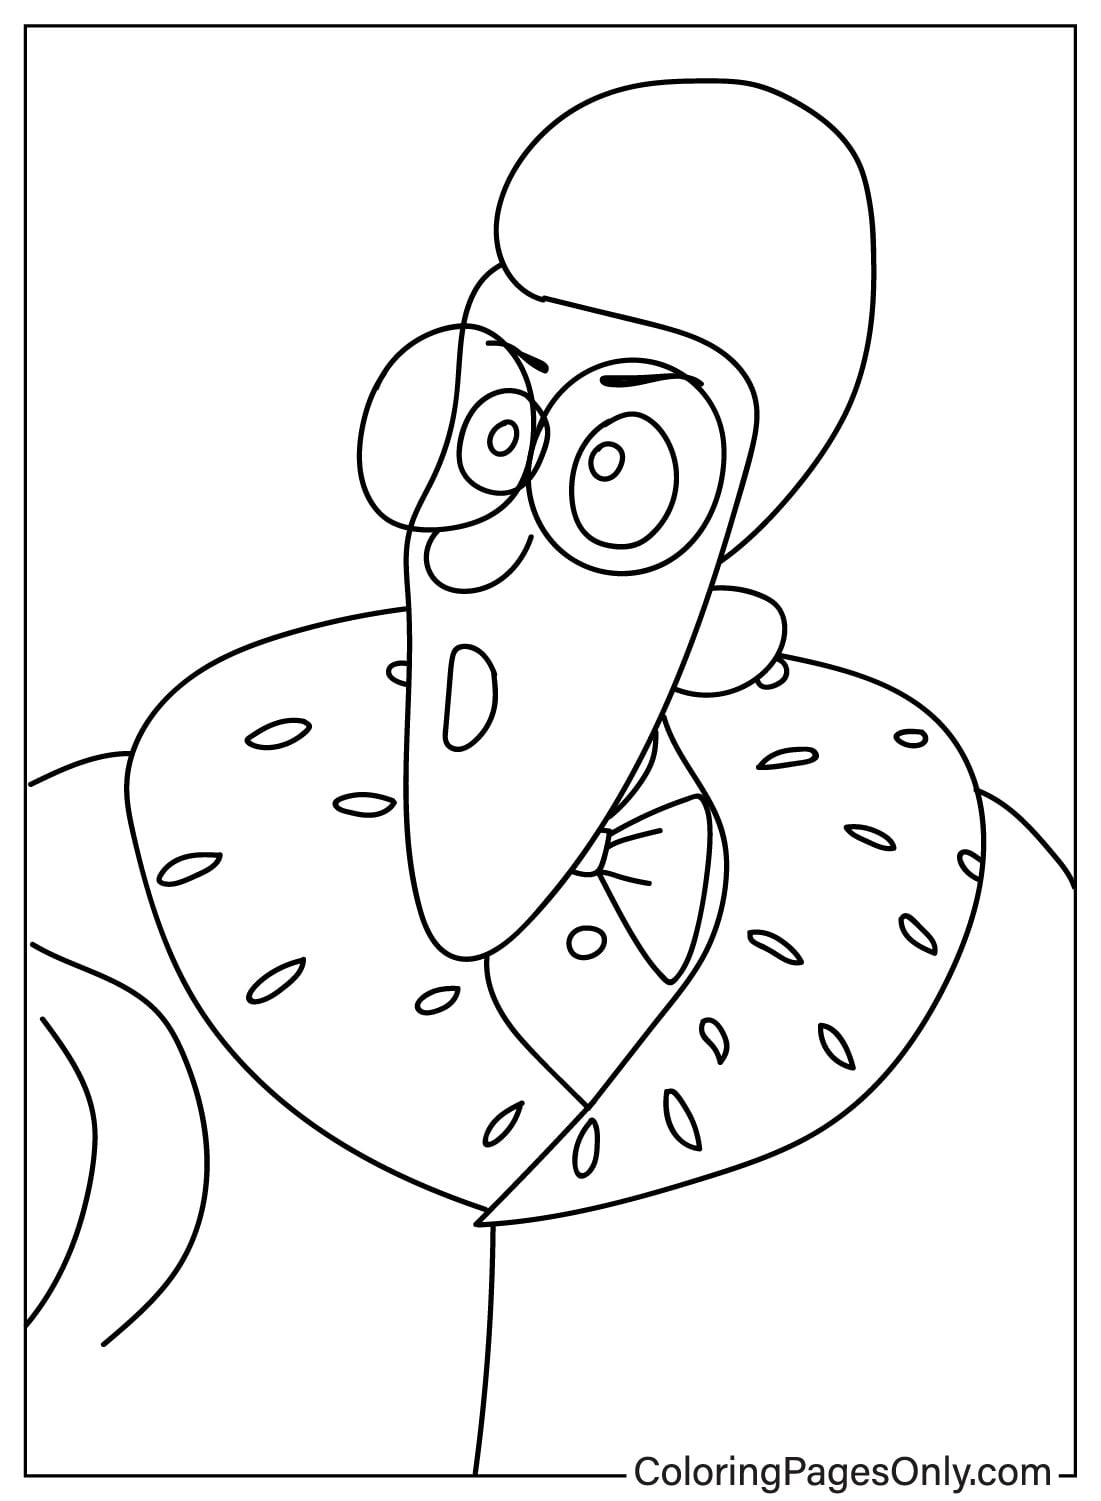 Despicable Me 4 Coloring Book from Despicable Me 4